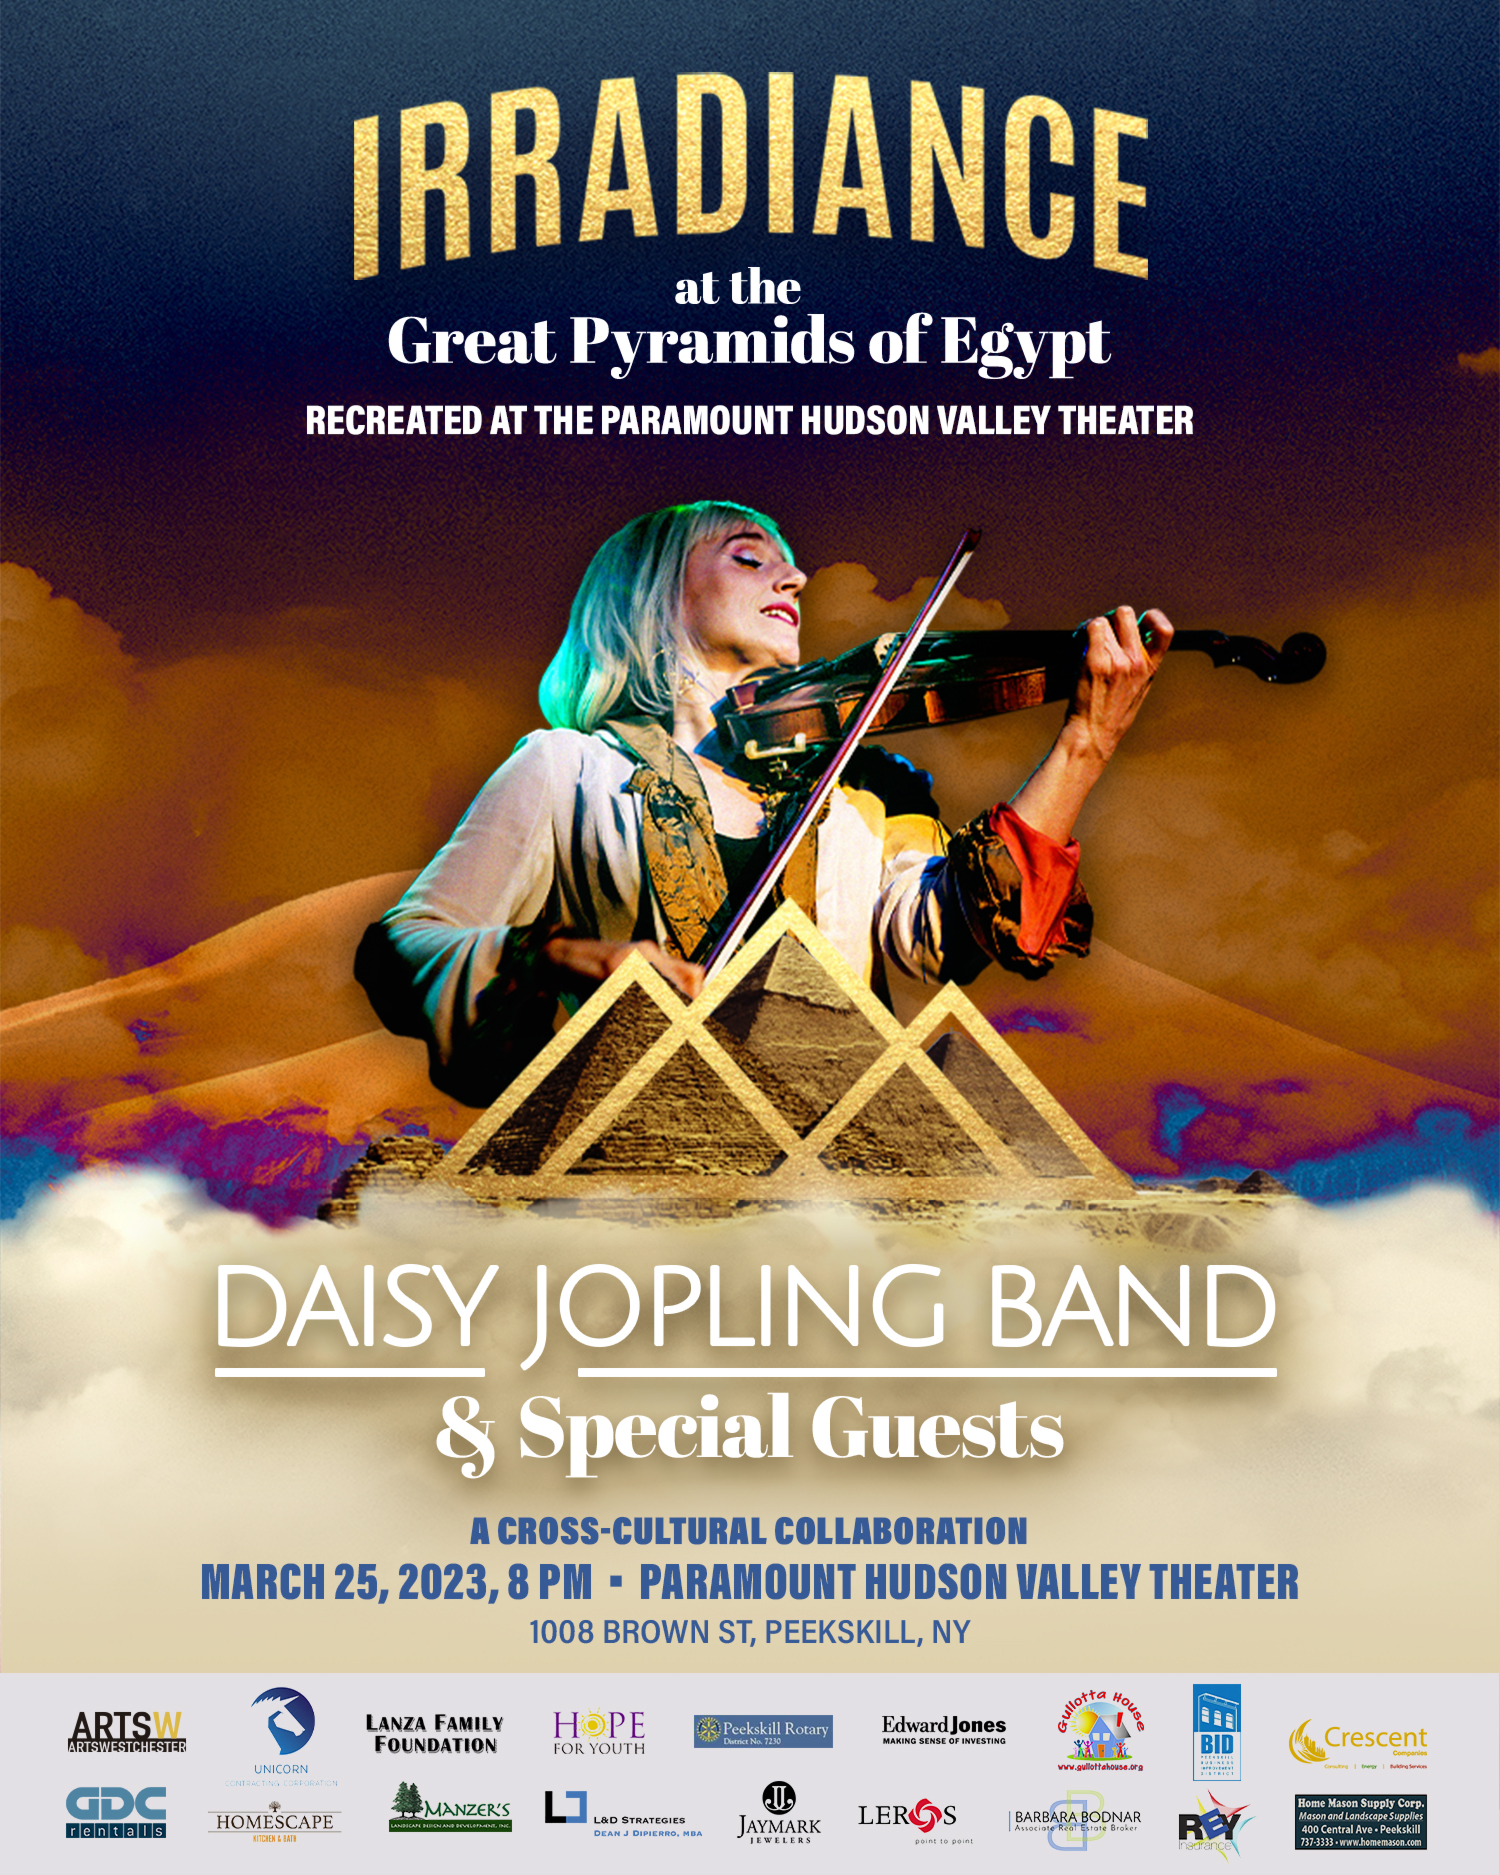 IRRADIANCE at the Great Pyramids of Egypt Recreated Featuring The Daisy Jopling Band March 25th, 2023 At the Paramount Hudson Valley Theater In Peekskill, NY 